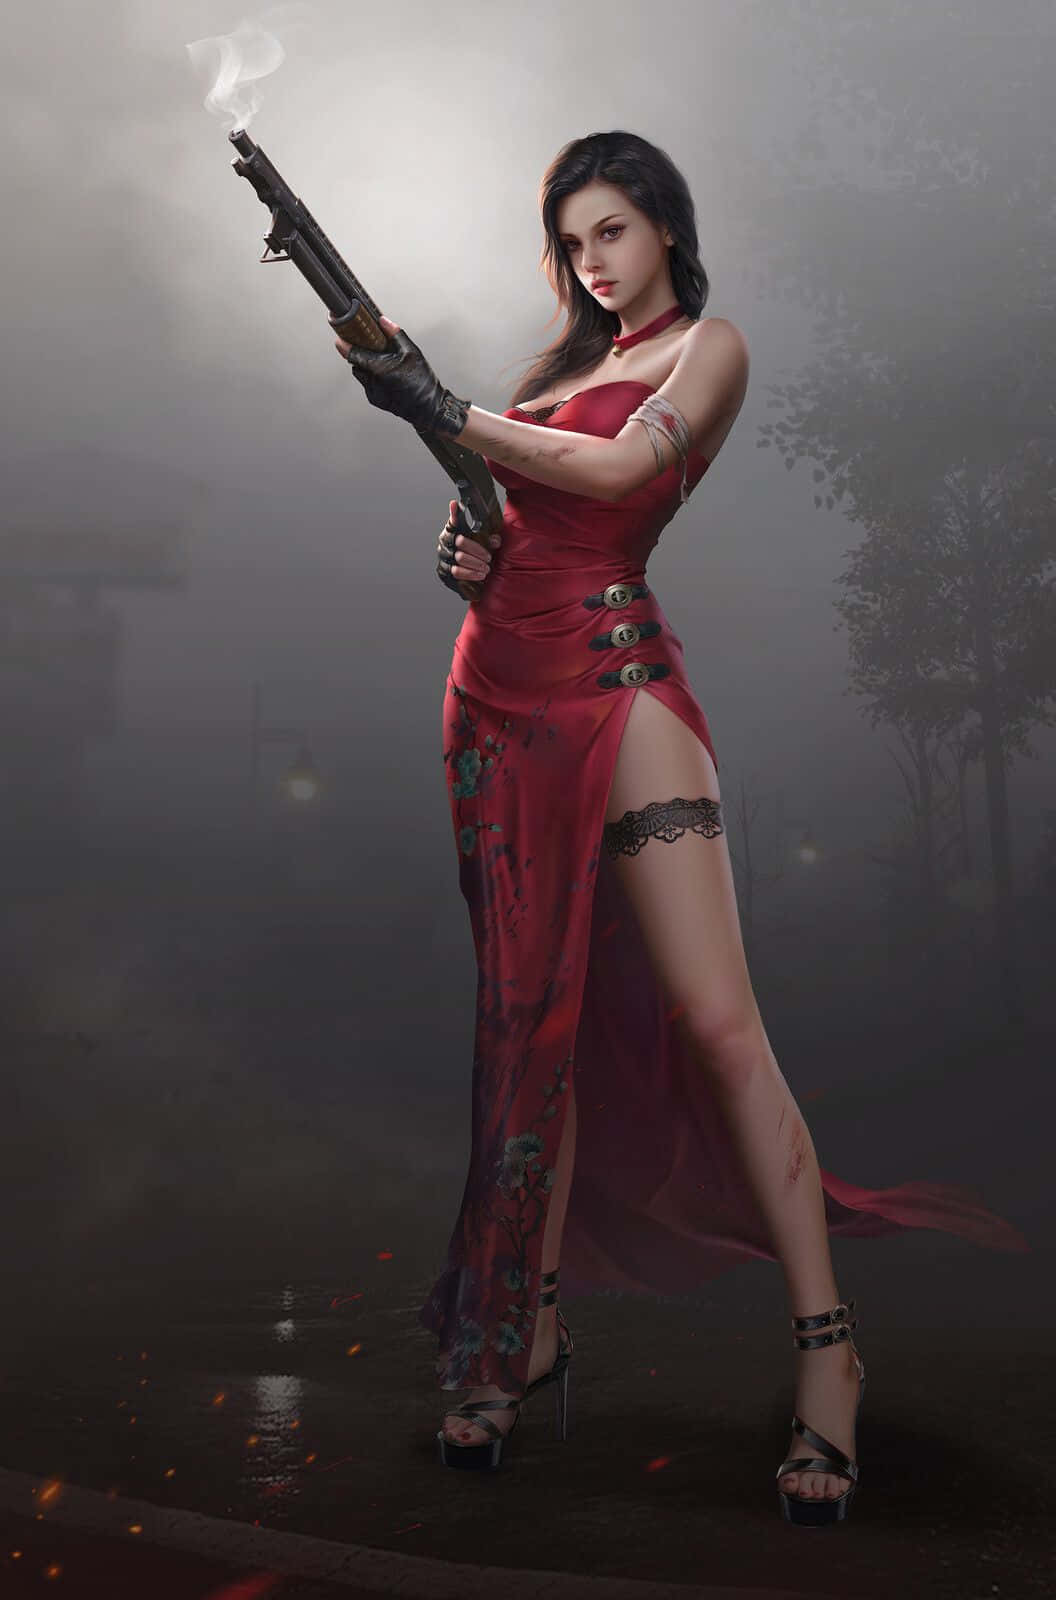 Pubg Girl In Red Dress Background